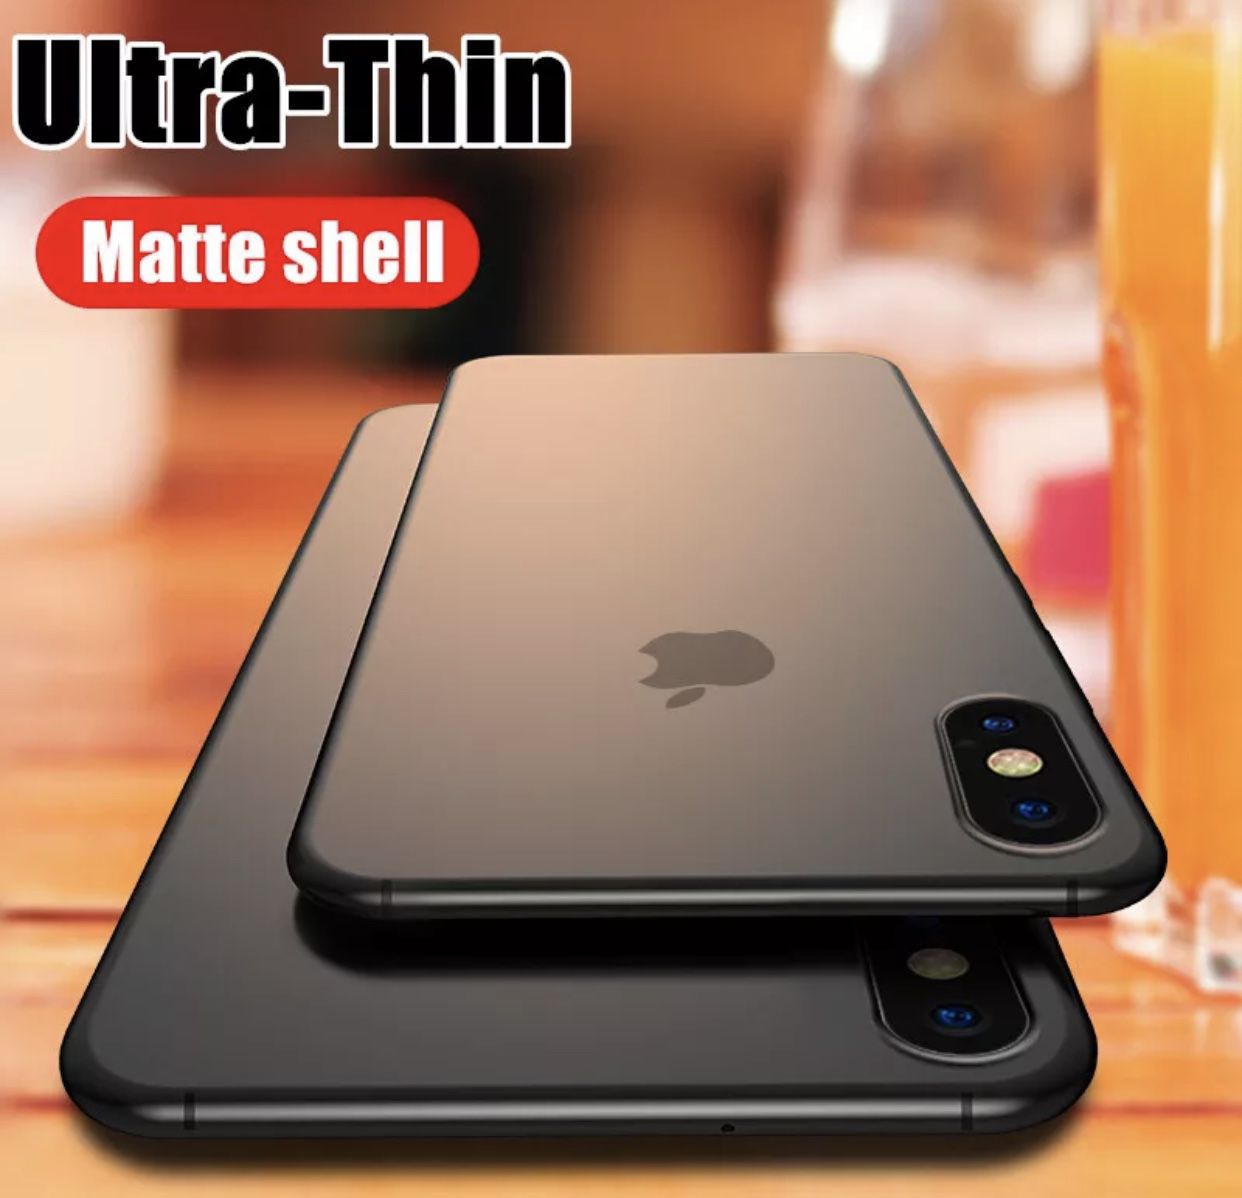 iPhone protective case! **ULTRA THIN** comes in white/black/gray/green.